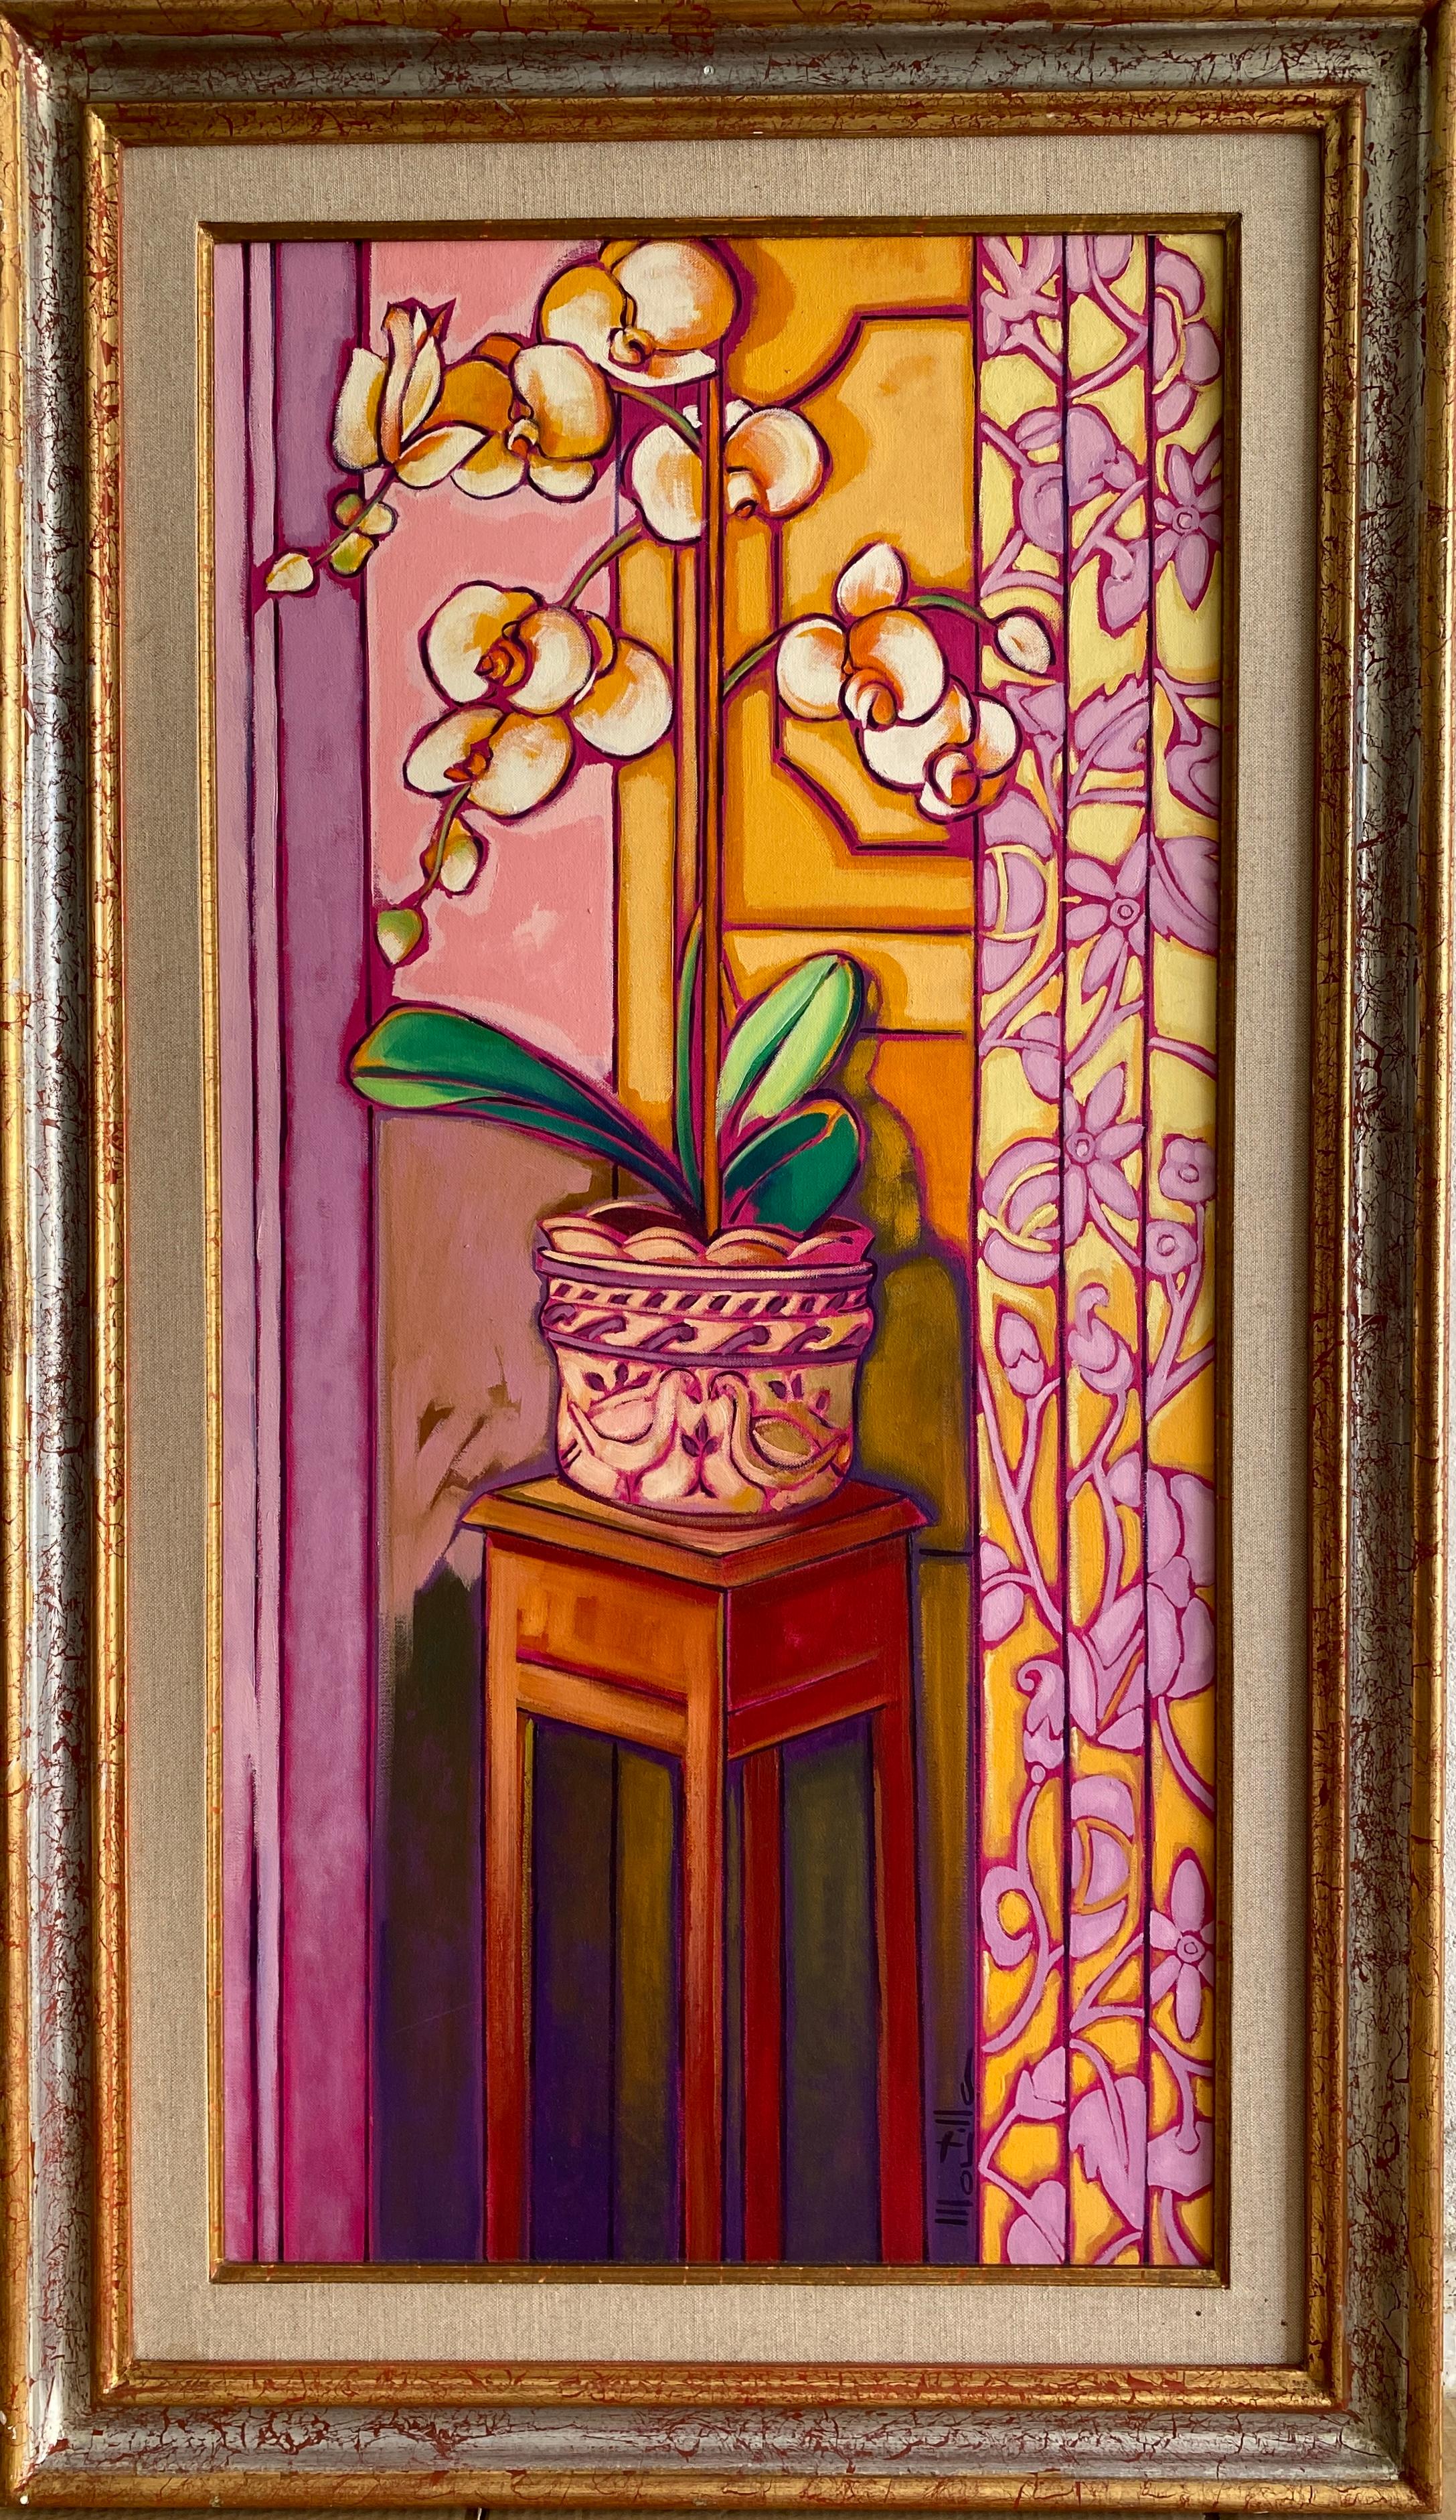 Orquídea (Orchid) - Expressionist Painting by Chico Montilla